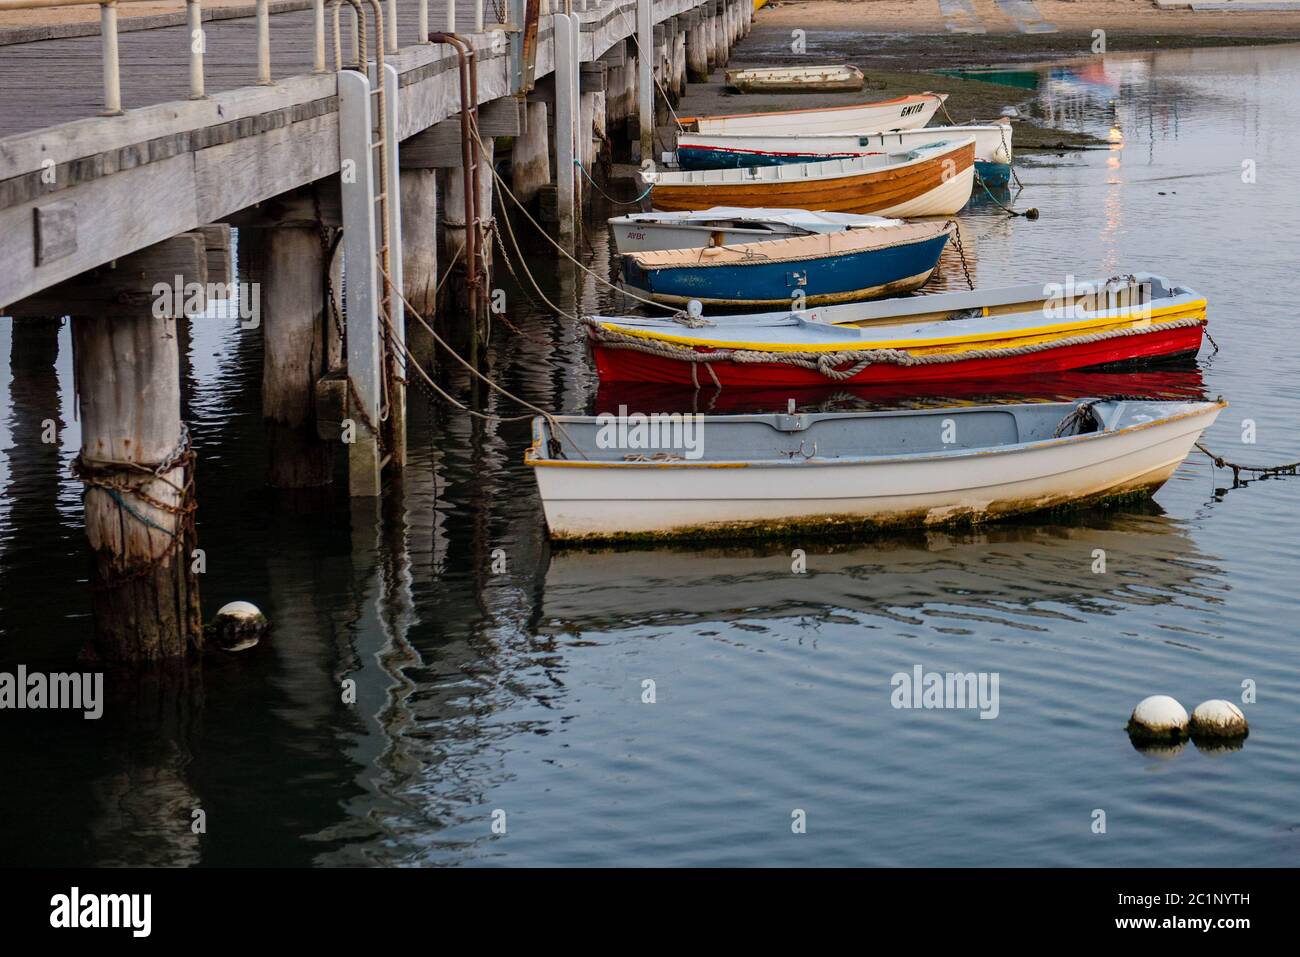 Row of old small fishing boats tied up to jetty, Victoria Australia Stock Photo